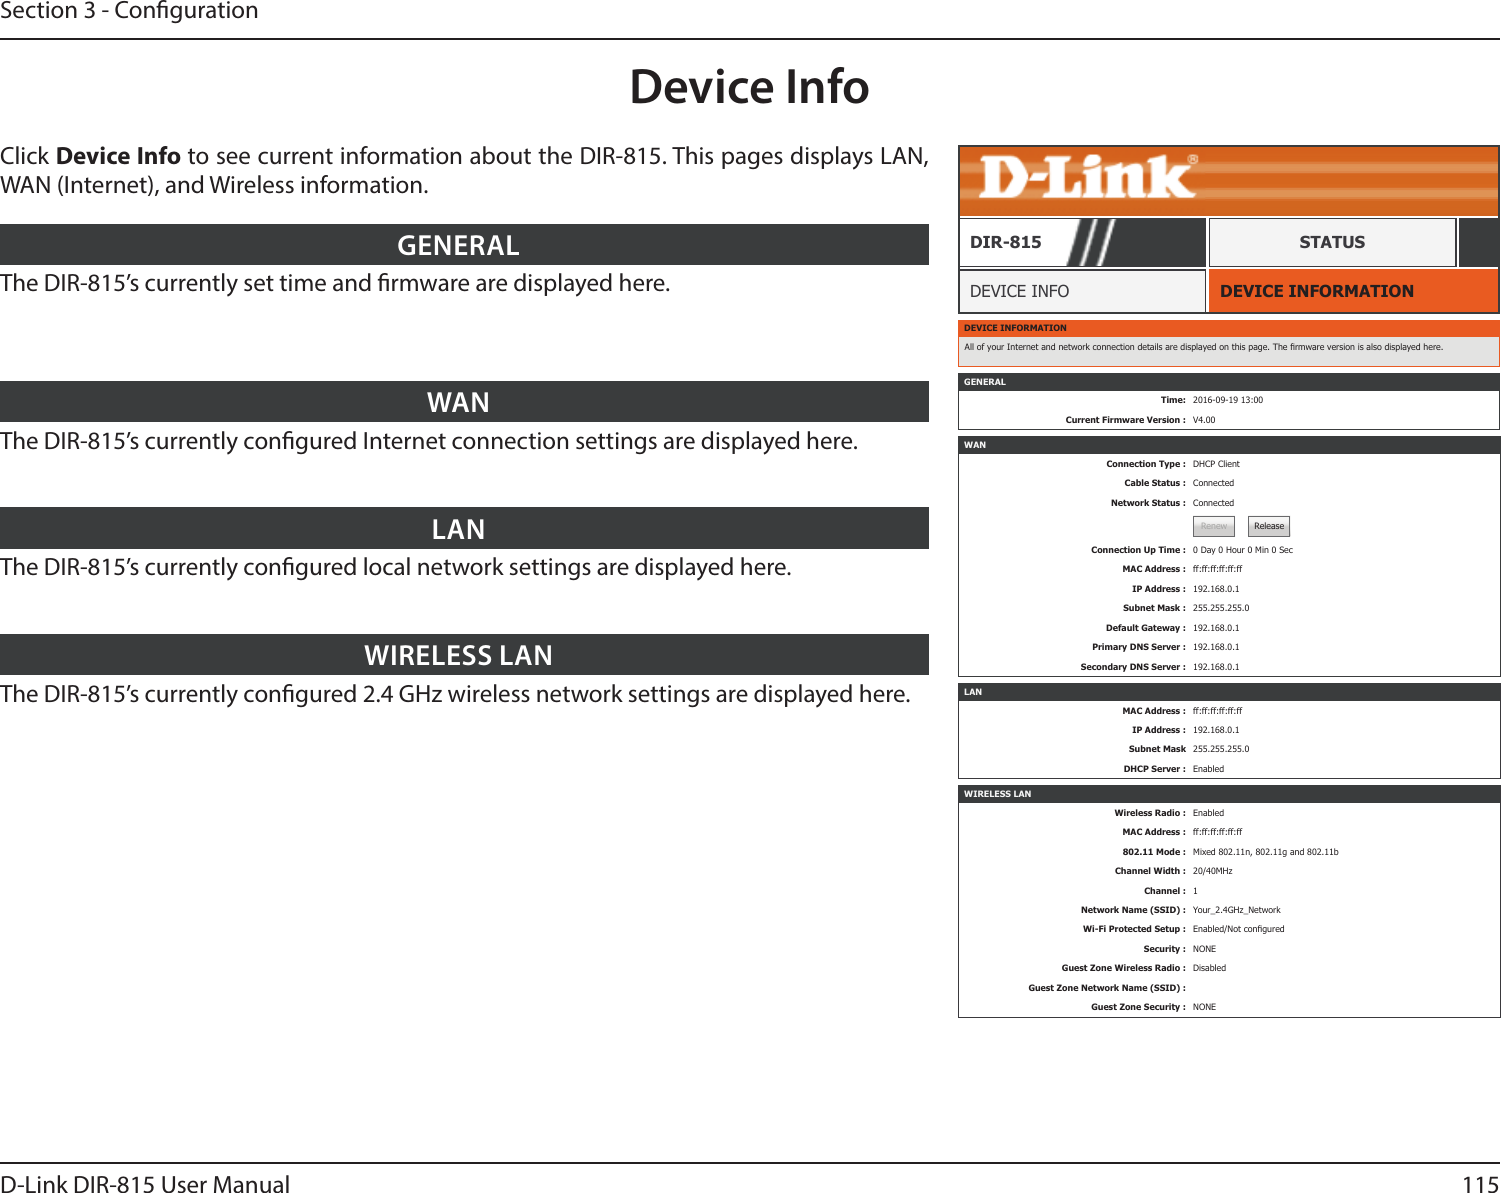 115D-Link DIR-815 User ManualSection 3 - CongurationDevice InfoDEVICE INFORMATIONDEVICE INFODIR-815 STATUSClick Device Info to see current information about the DIR-815. This pages displays LAN, WAN (Internet), and Wireless information.The DIR-815’s currently set time and rmware are displayed here.GENERALThe DIR-815’s currently congured Internet connection settings are displayed here.WANThe DIR-815’s currently congured local network settings are displayed here.LANThe DIR-815’s currently congured 2.4 GHz wireless network settings are displayed here.WIRELESS LANDEVICE INFORMATIONAll of your Internet and network connection details are displayed on this page. The rmware version is also displayed here.WANConnection Type : DHCP ClientCable Status : ConnectedNetwork Status : ConnectedRenew ReleaseConnection Up Time : 0 Day 0 Hour 0 Min 0 SecMAC Address : ff:ff:ff:ff:ff:ffIP Address : 192.168.0.1Subnet Mask : 255.255.255.0Default Gateway : 192.168.0.1Primary DNS Server : 192.168.0.1Secondary DNS Server : 192.168.0.1LANMAC Address : ff:ff:ff:ff:ff:ffIP Address : 192.168.0.1Subnet Mask 255.255.255.0DHCP Server : EnabledWIRELESS LANWireless Radio : EnabledMAC Address : ff:ff:ff:ff:ff:ff802.11 Mode : Mixed 802.11n, 802.11g and 802.11bChannel Width : 20/40MHzChannel : 1Network Name (SSID) : Your_2.4GHz_NetworkWi-Fi Protected Setup : Enabled/Not conguredSecurity : NONEGuest Zone Wireless Radio : DisabledGuest Zone Network Name (SSID) :Guest Zone Security : NONEGENERALTime: 2016-09-19 13:00Current Firmware Version : V4.00